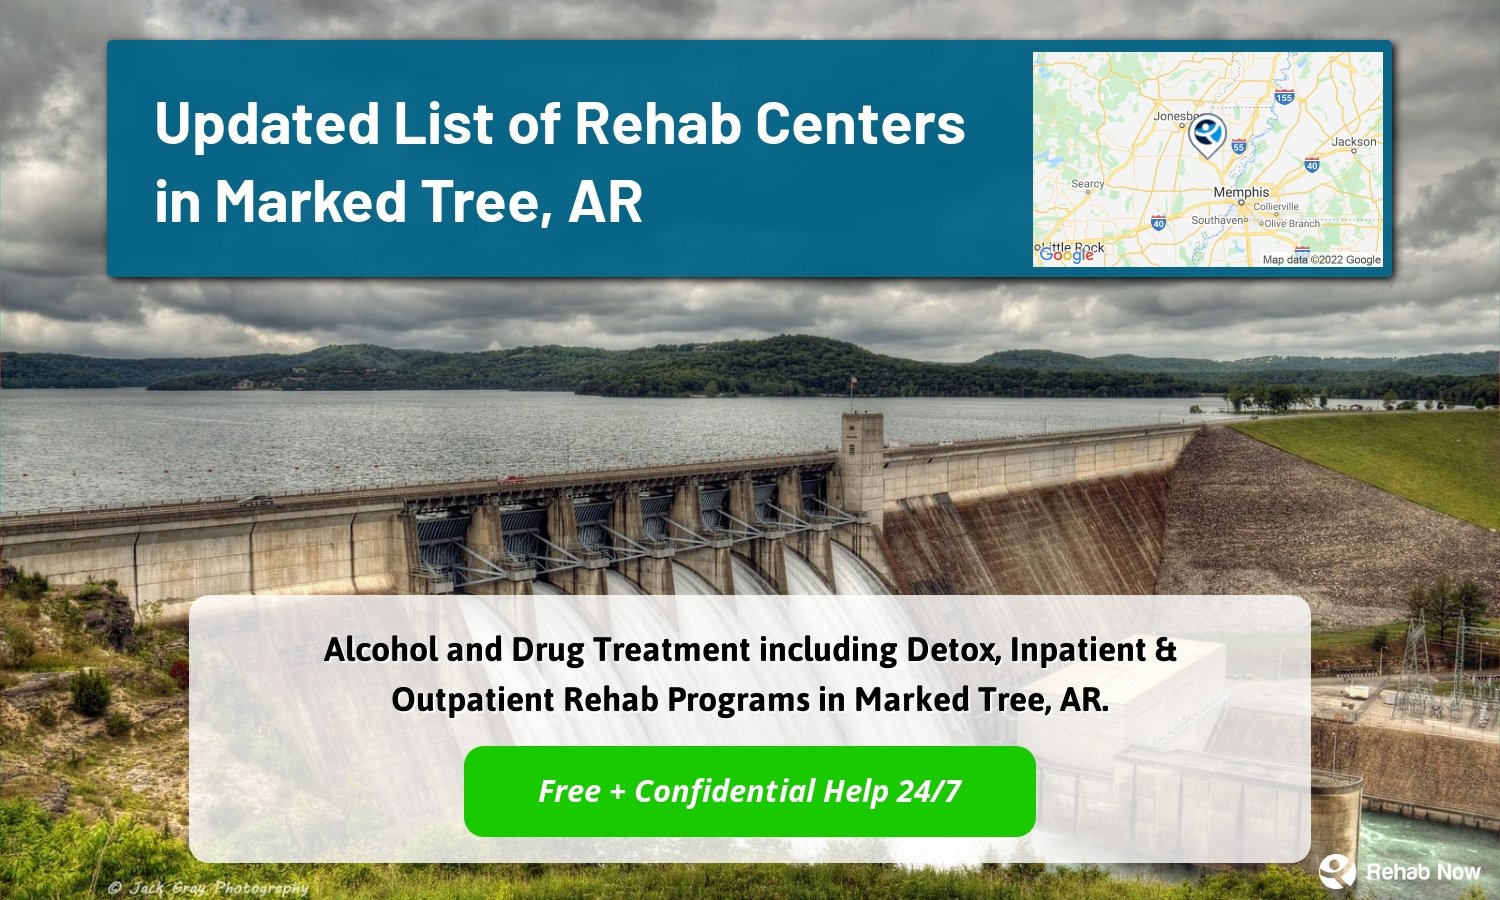 Alcohol and Drug Treatment including Detox, Inpatient & Outpatient Rehab Programs in Marked Tree, AR.